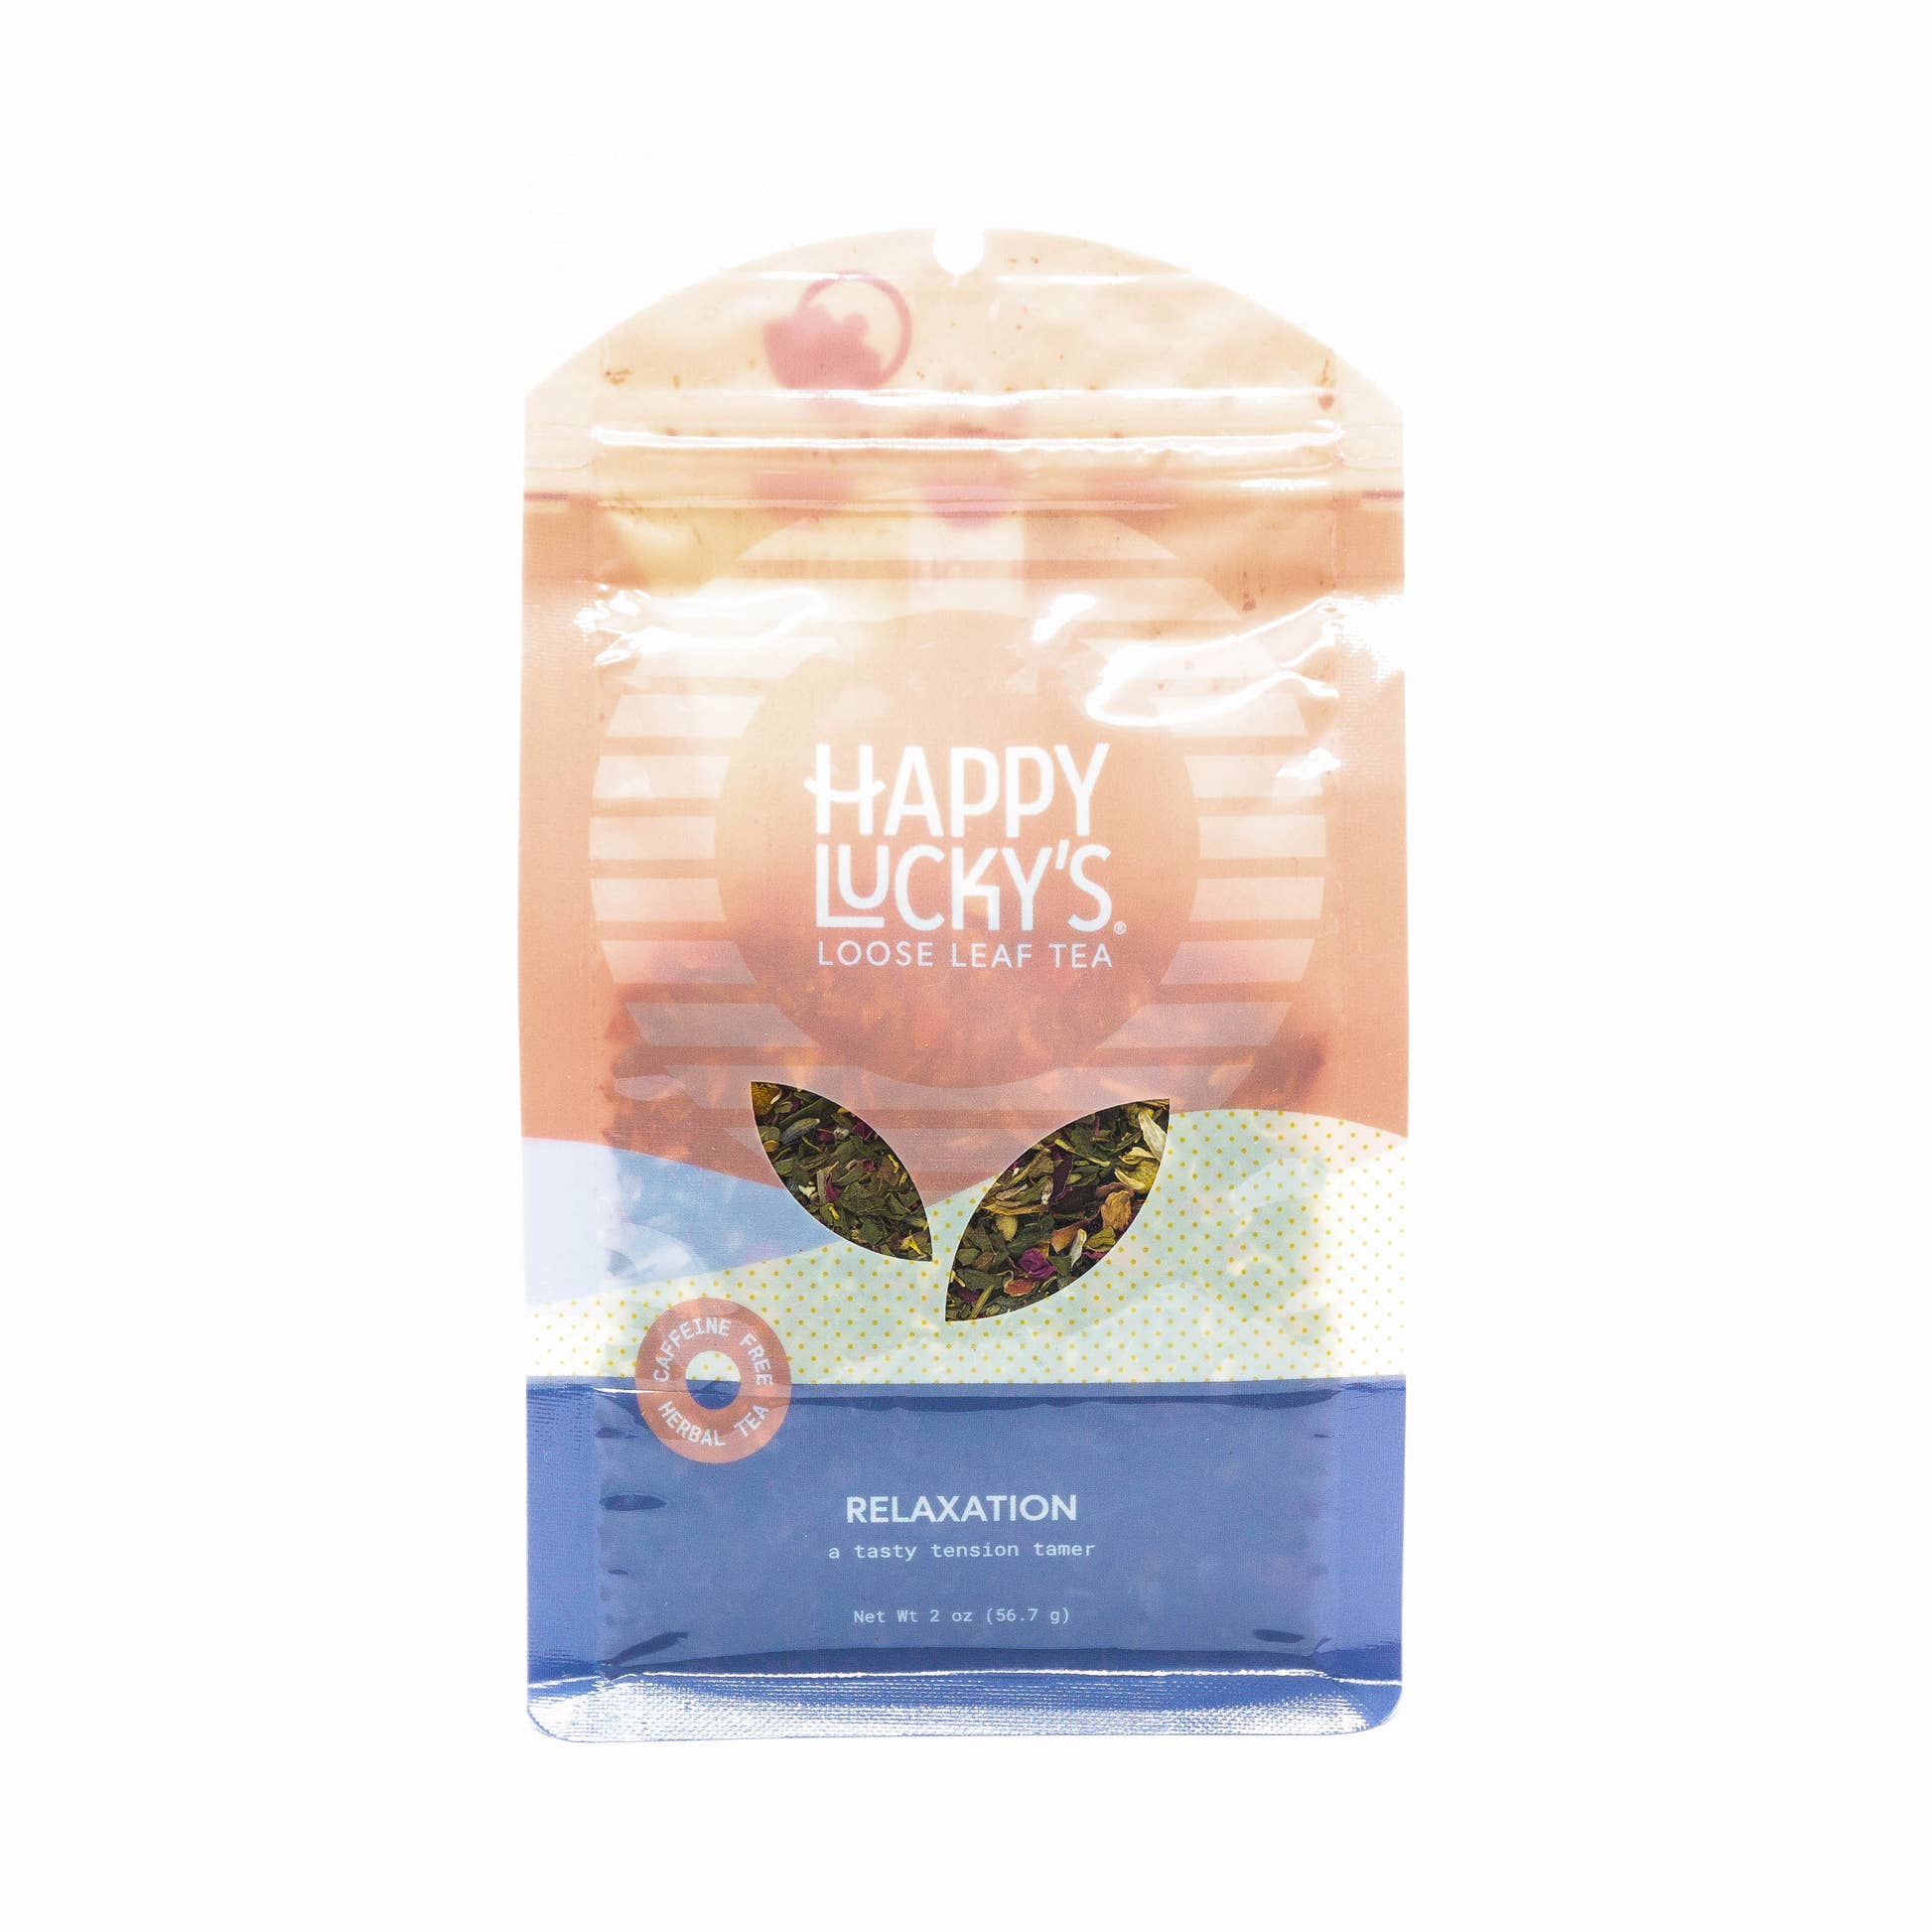 Shop Relaxation by Happy Lucky's at Sips by